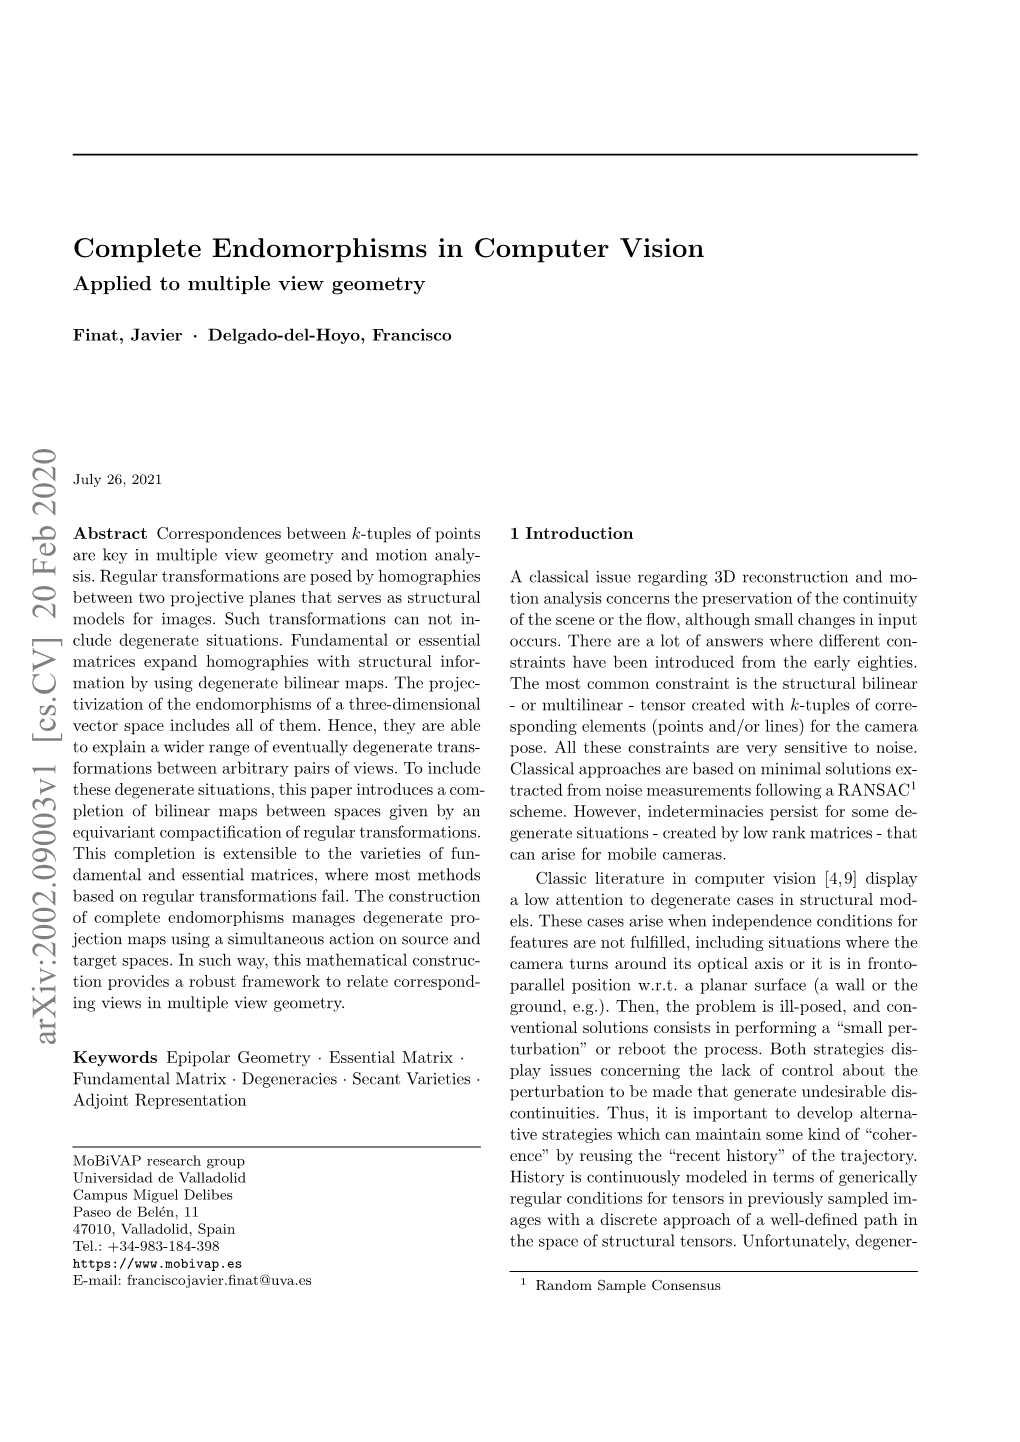 Complete Endomorphisms in Computer Vision Applied to Multiple View Geometry